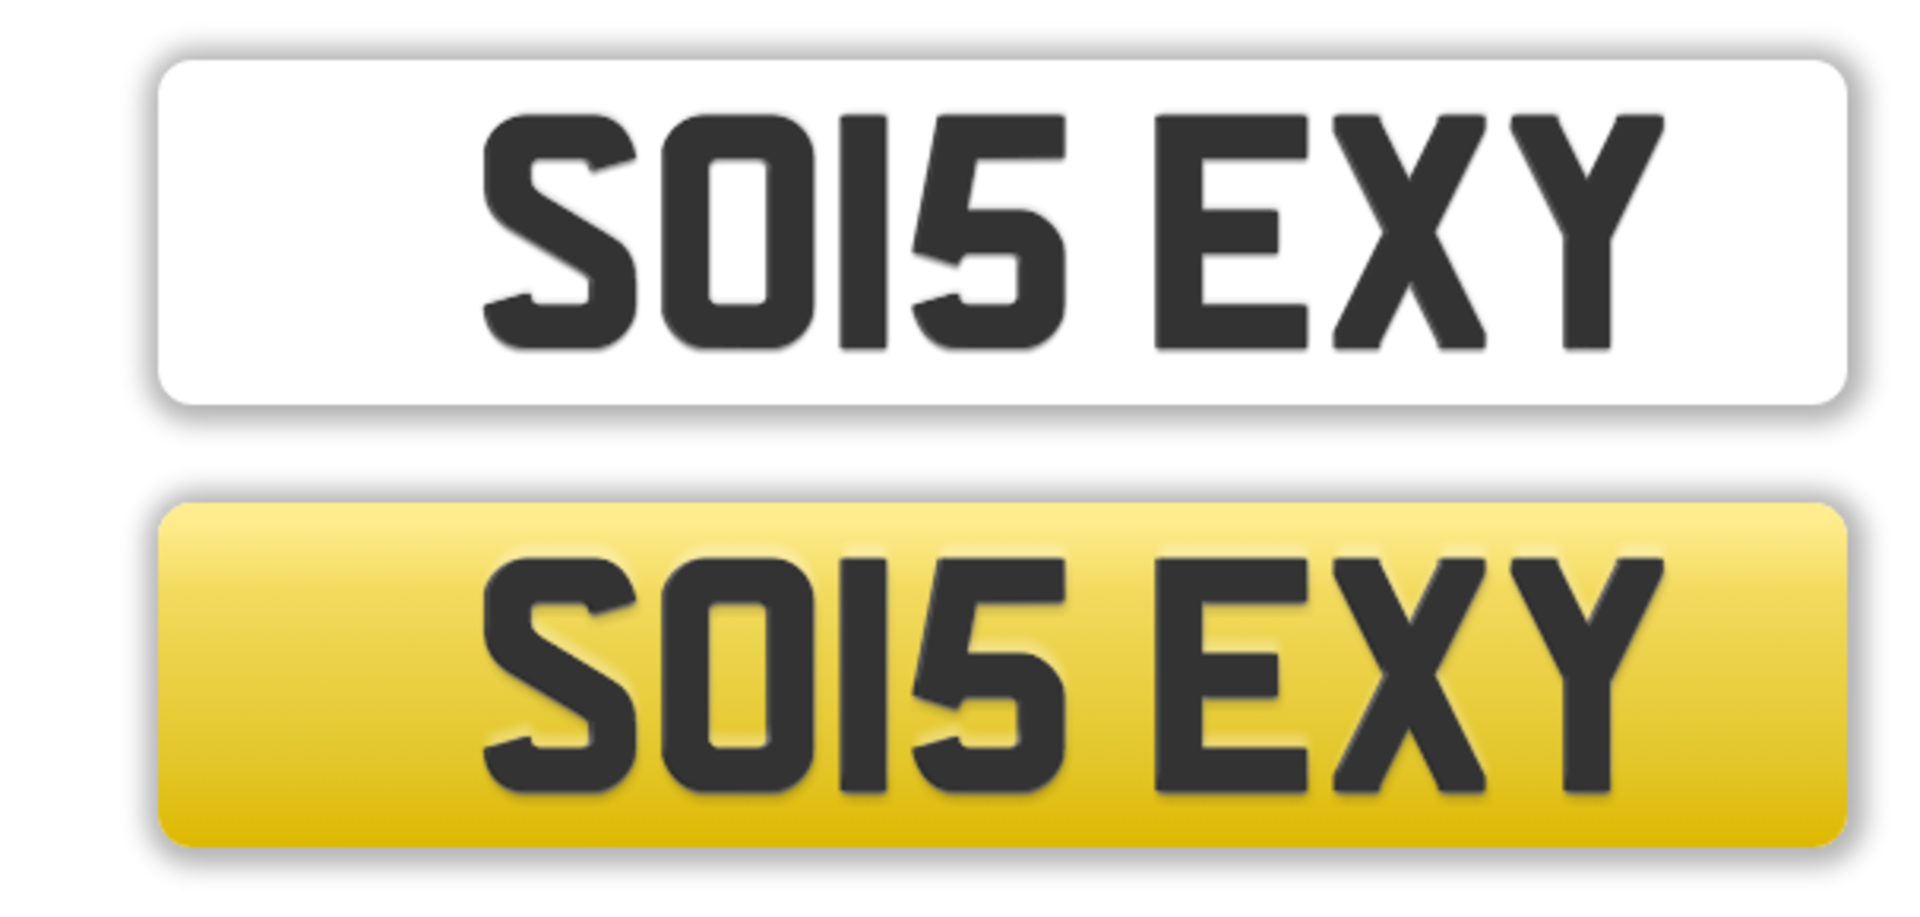 Cherished Registration Plate *SO 1 5EXY* On Retention